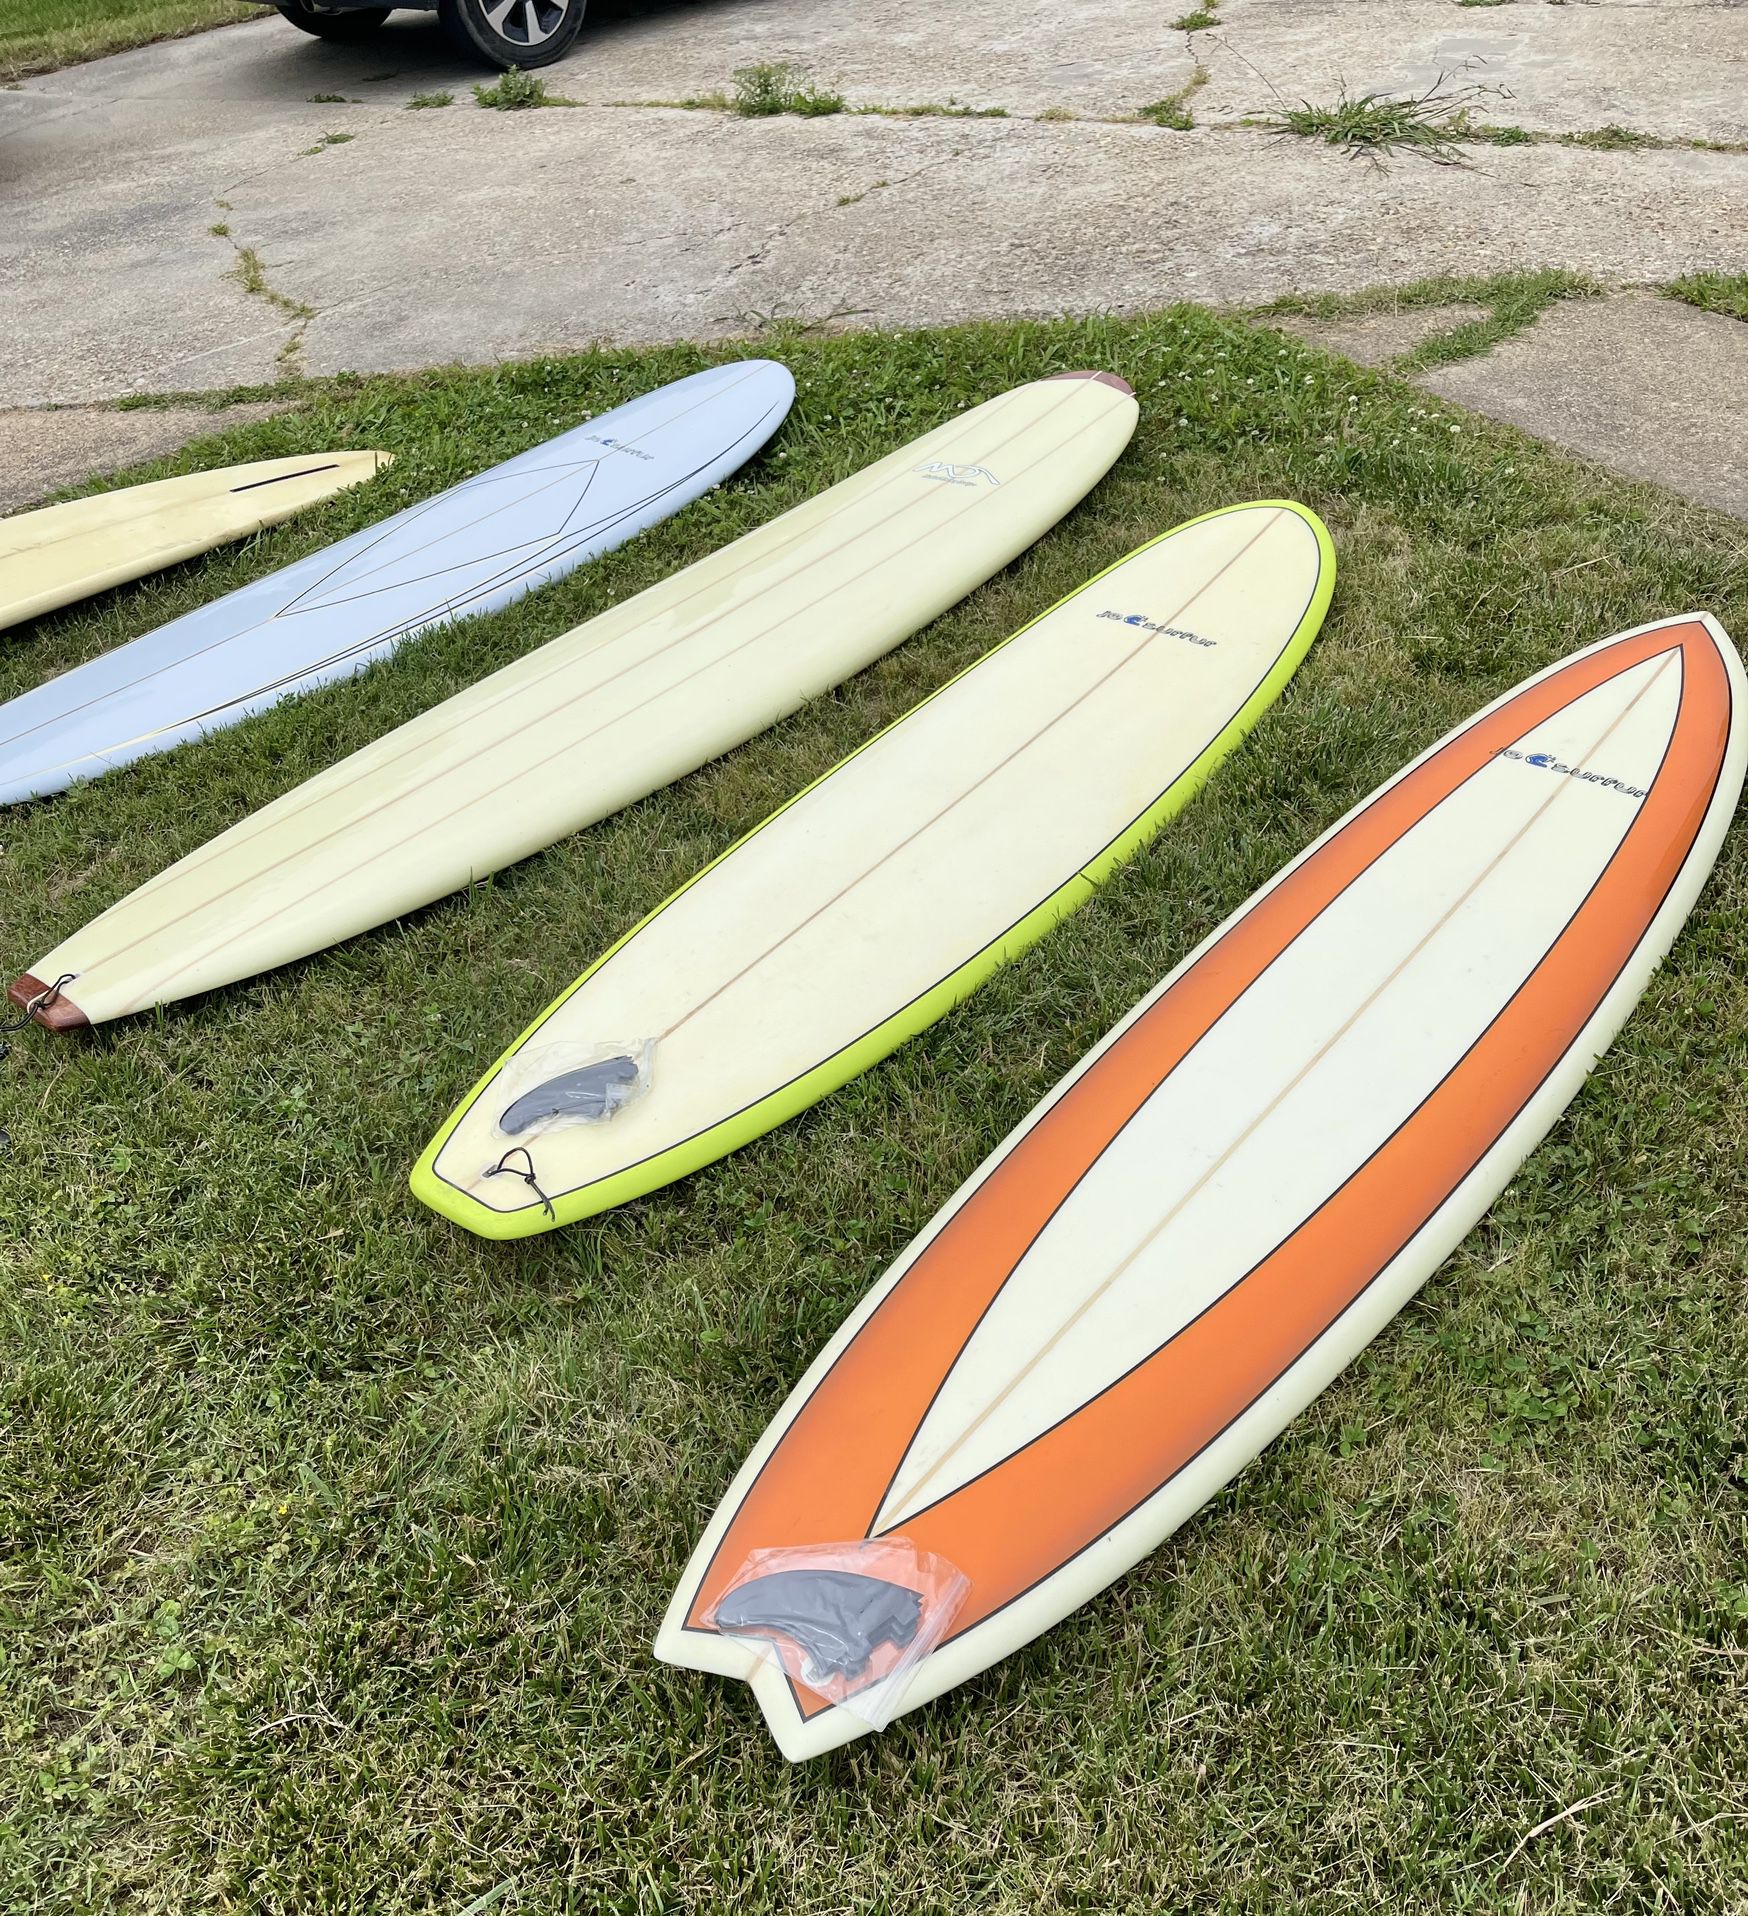 Surfboard Lot - Midlengths, Fish, and Longboard